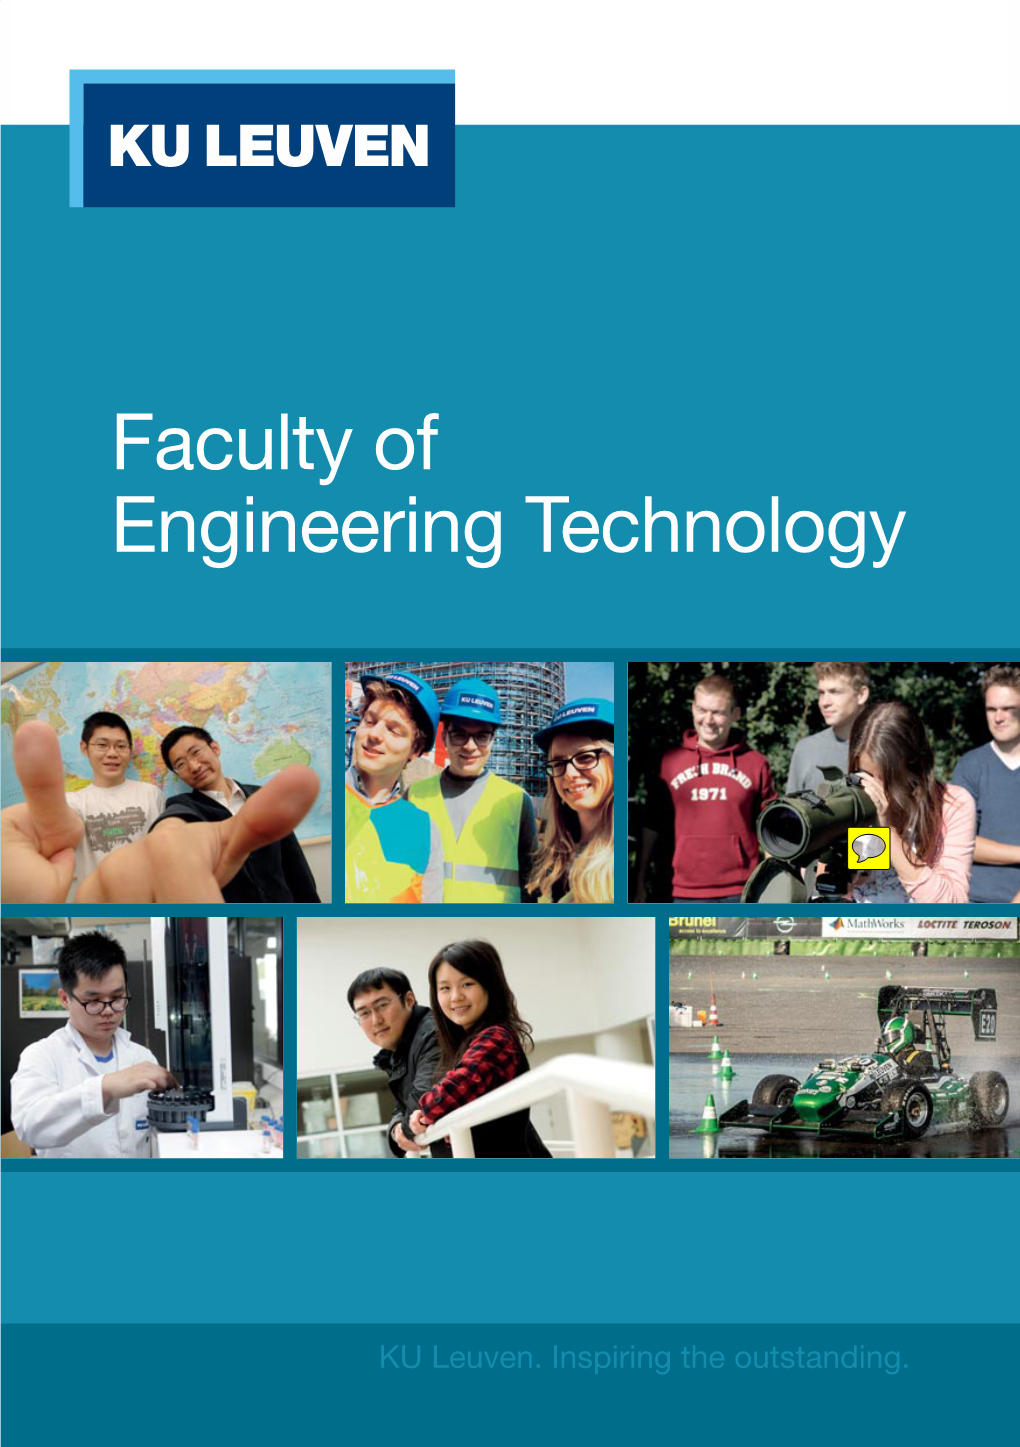 Faculty of Engineering Technology